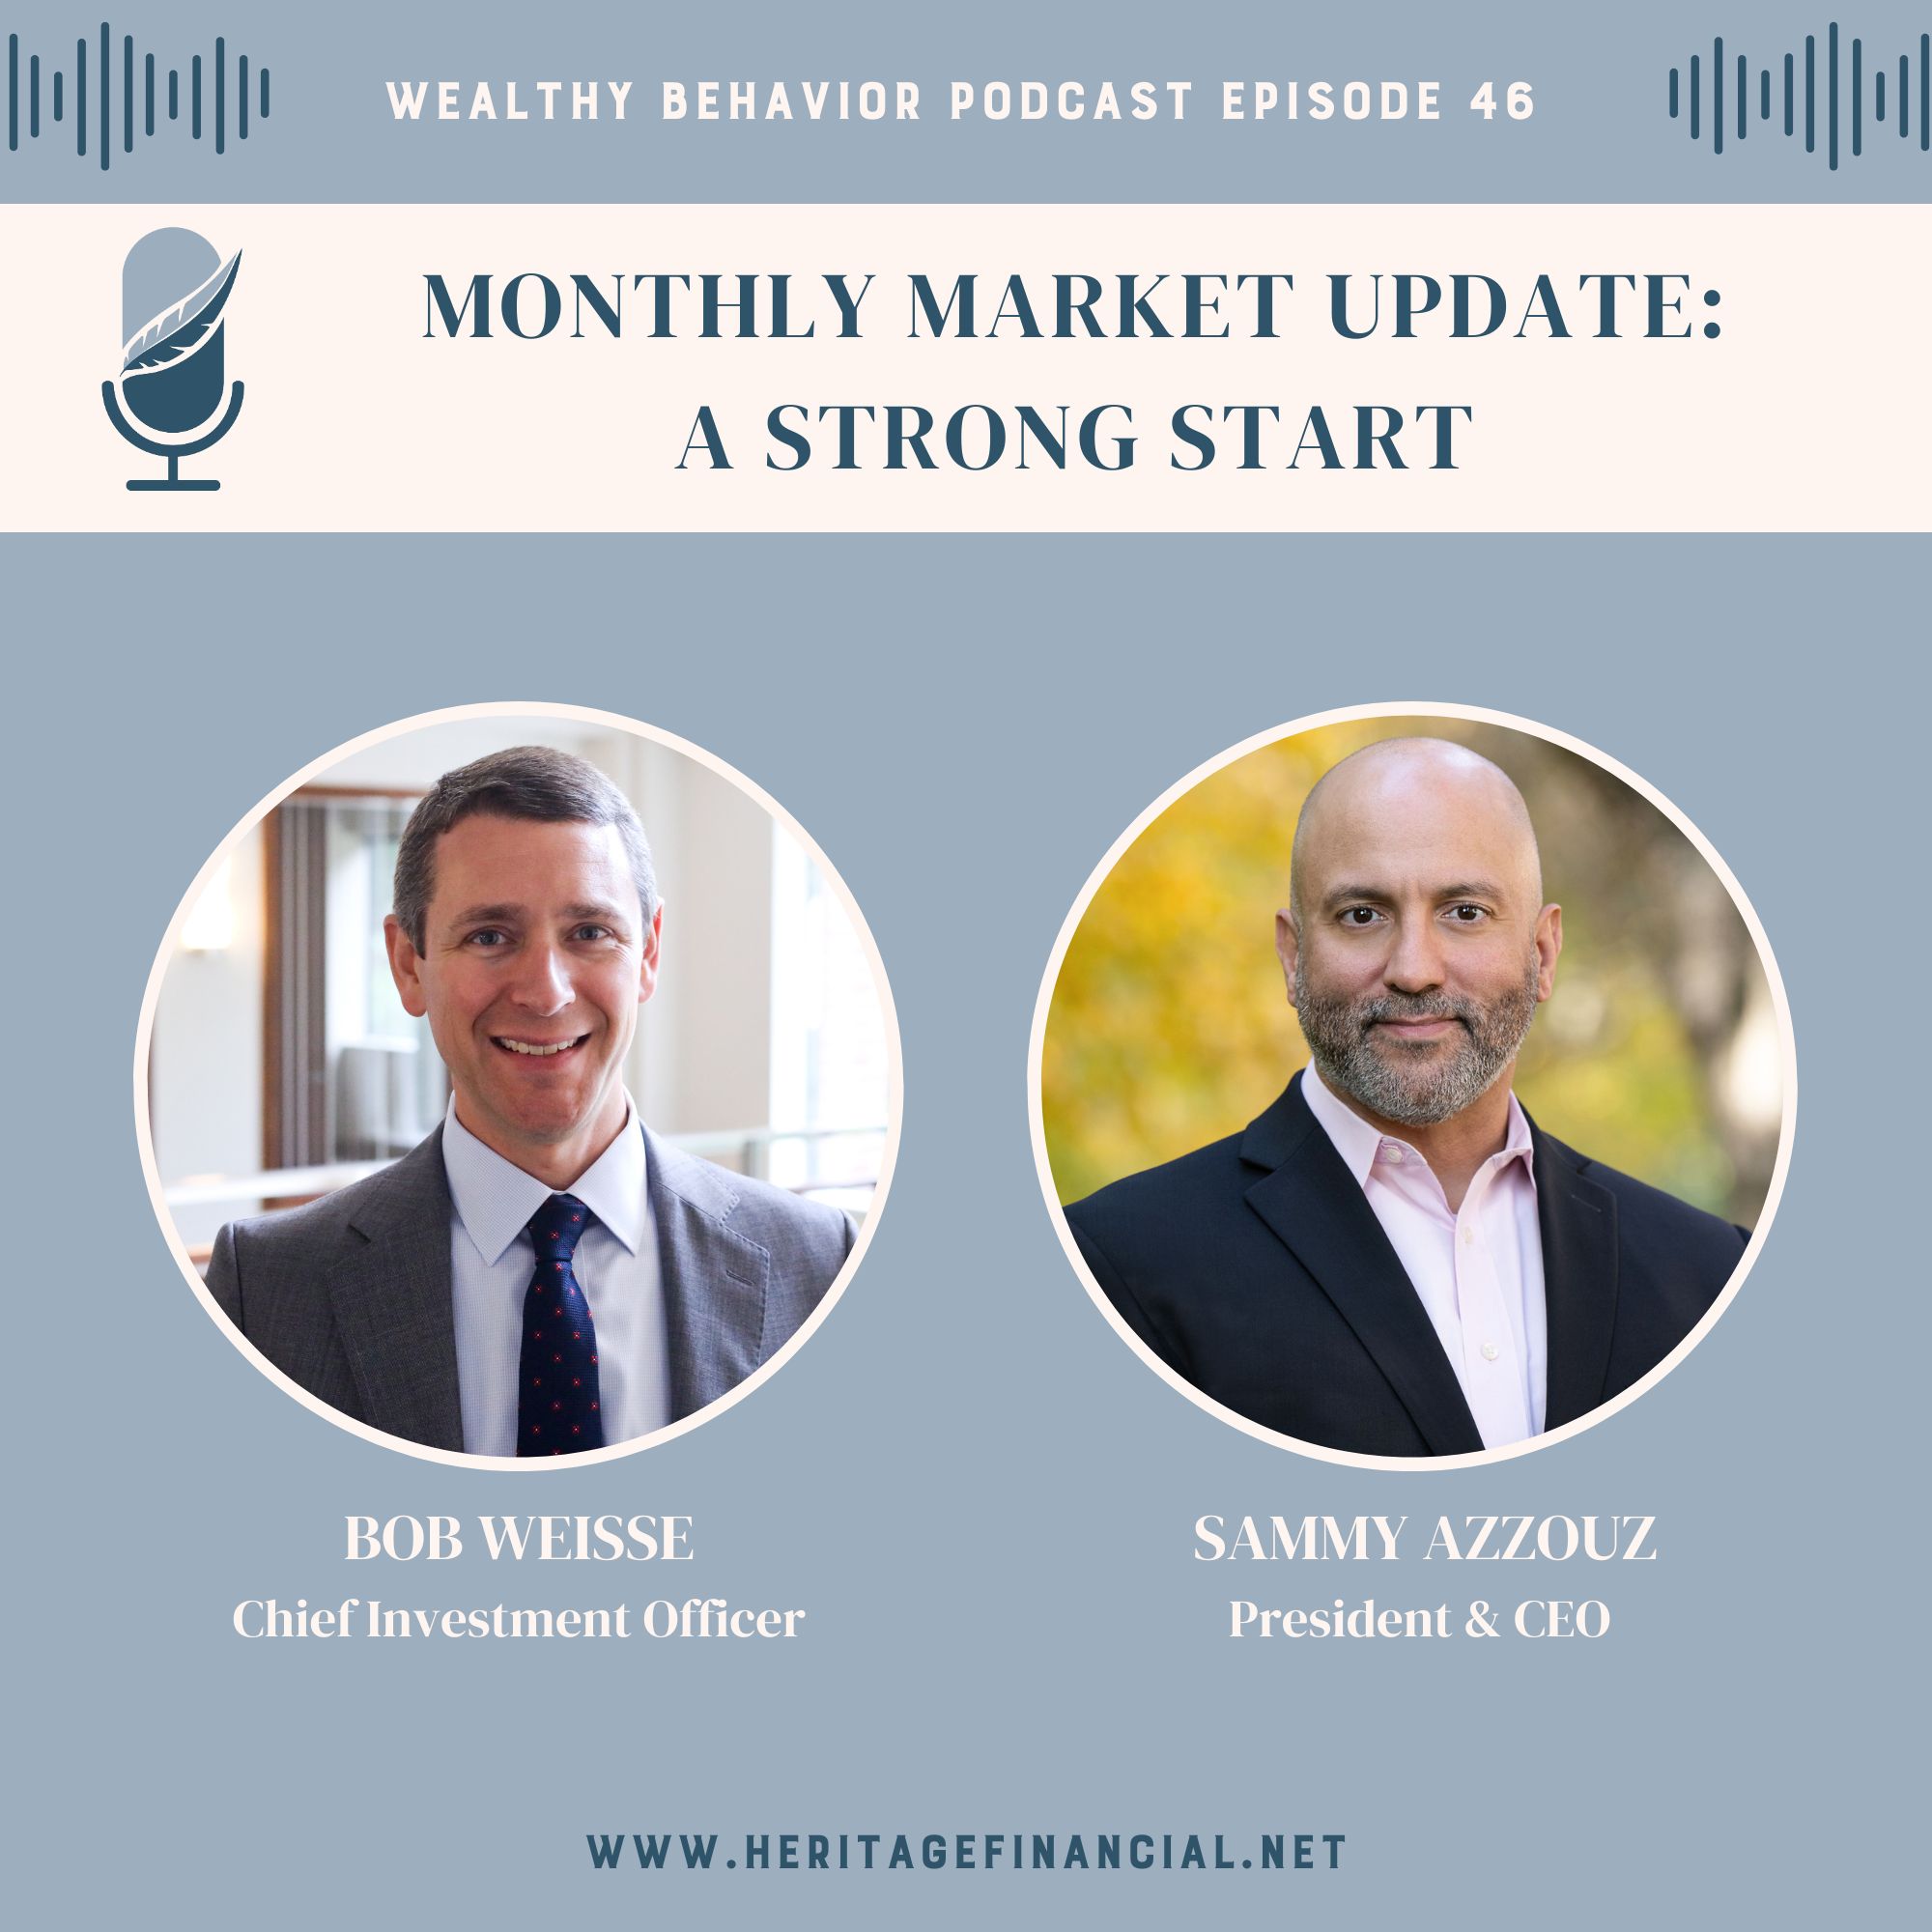 Wealthy Behavior Podcast - Monthly Market Update: A Strong Start